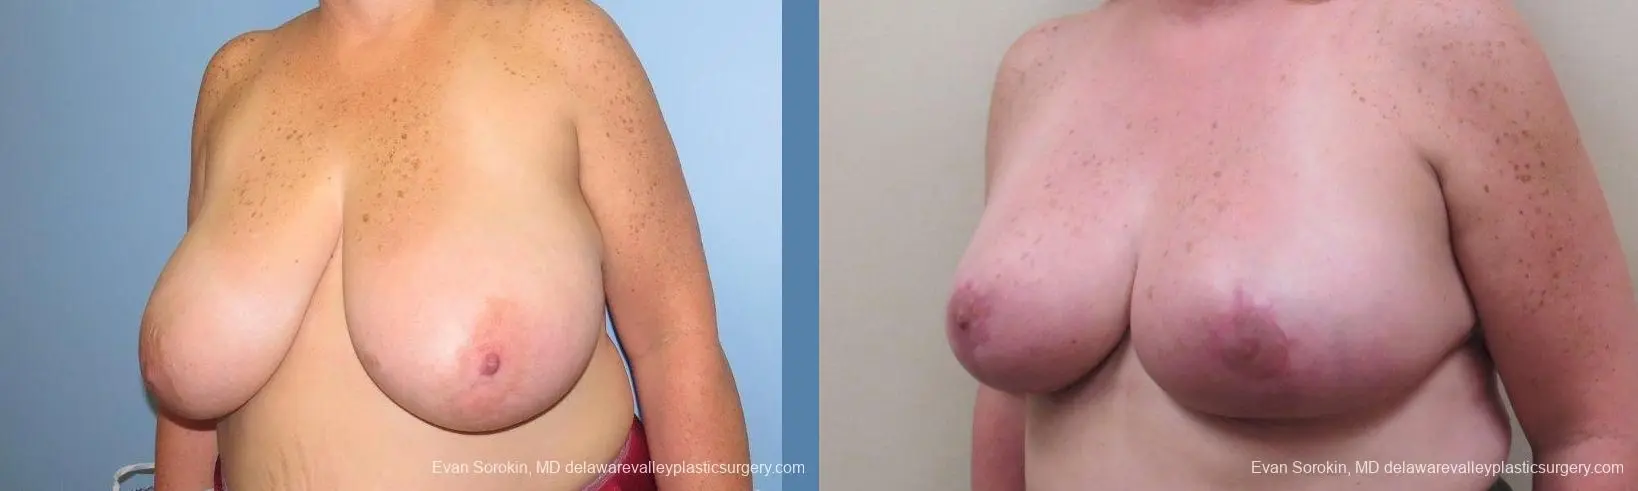 Philadelphia Breast Reduction 10118 - Before and After 4